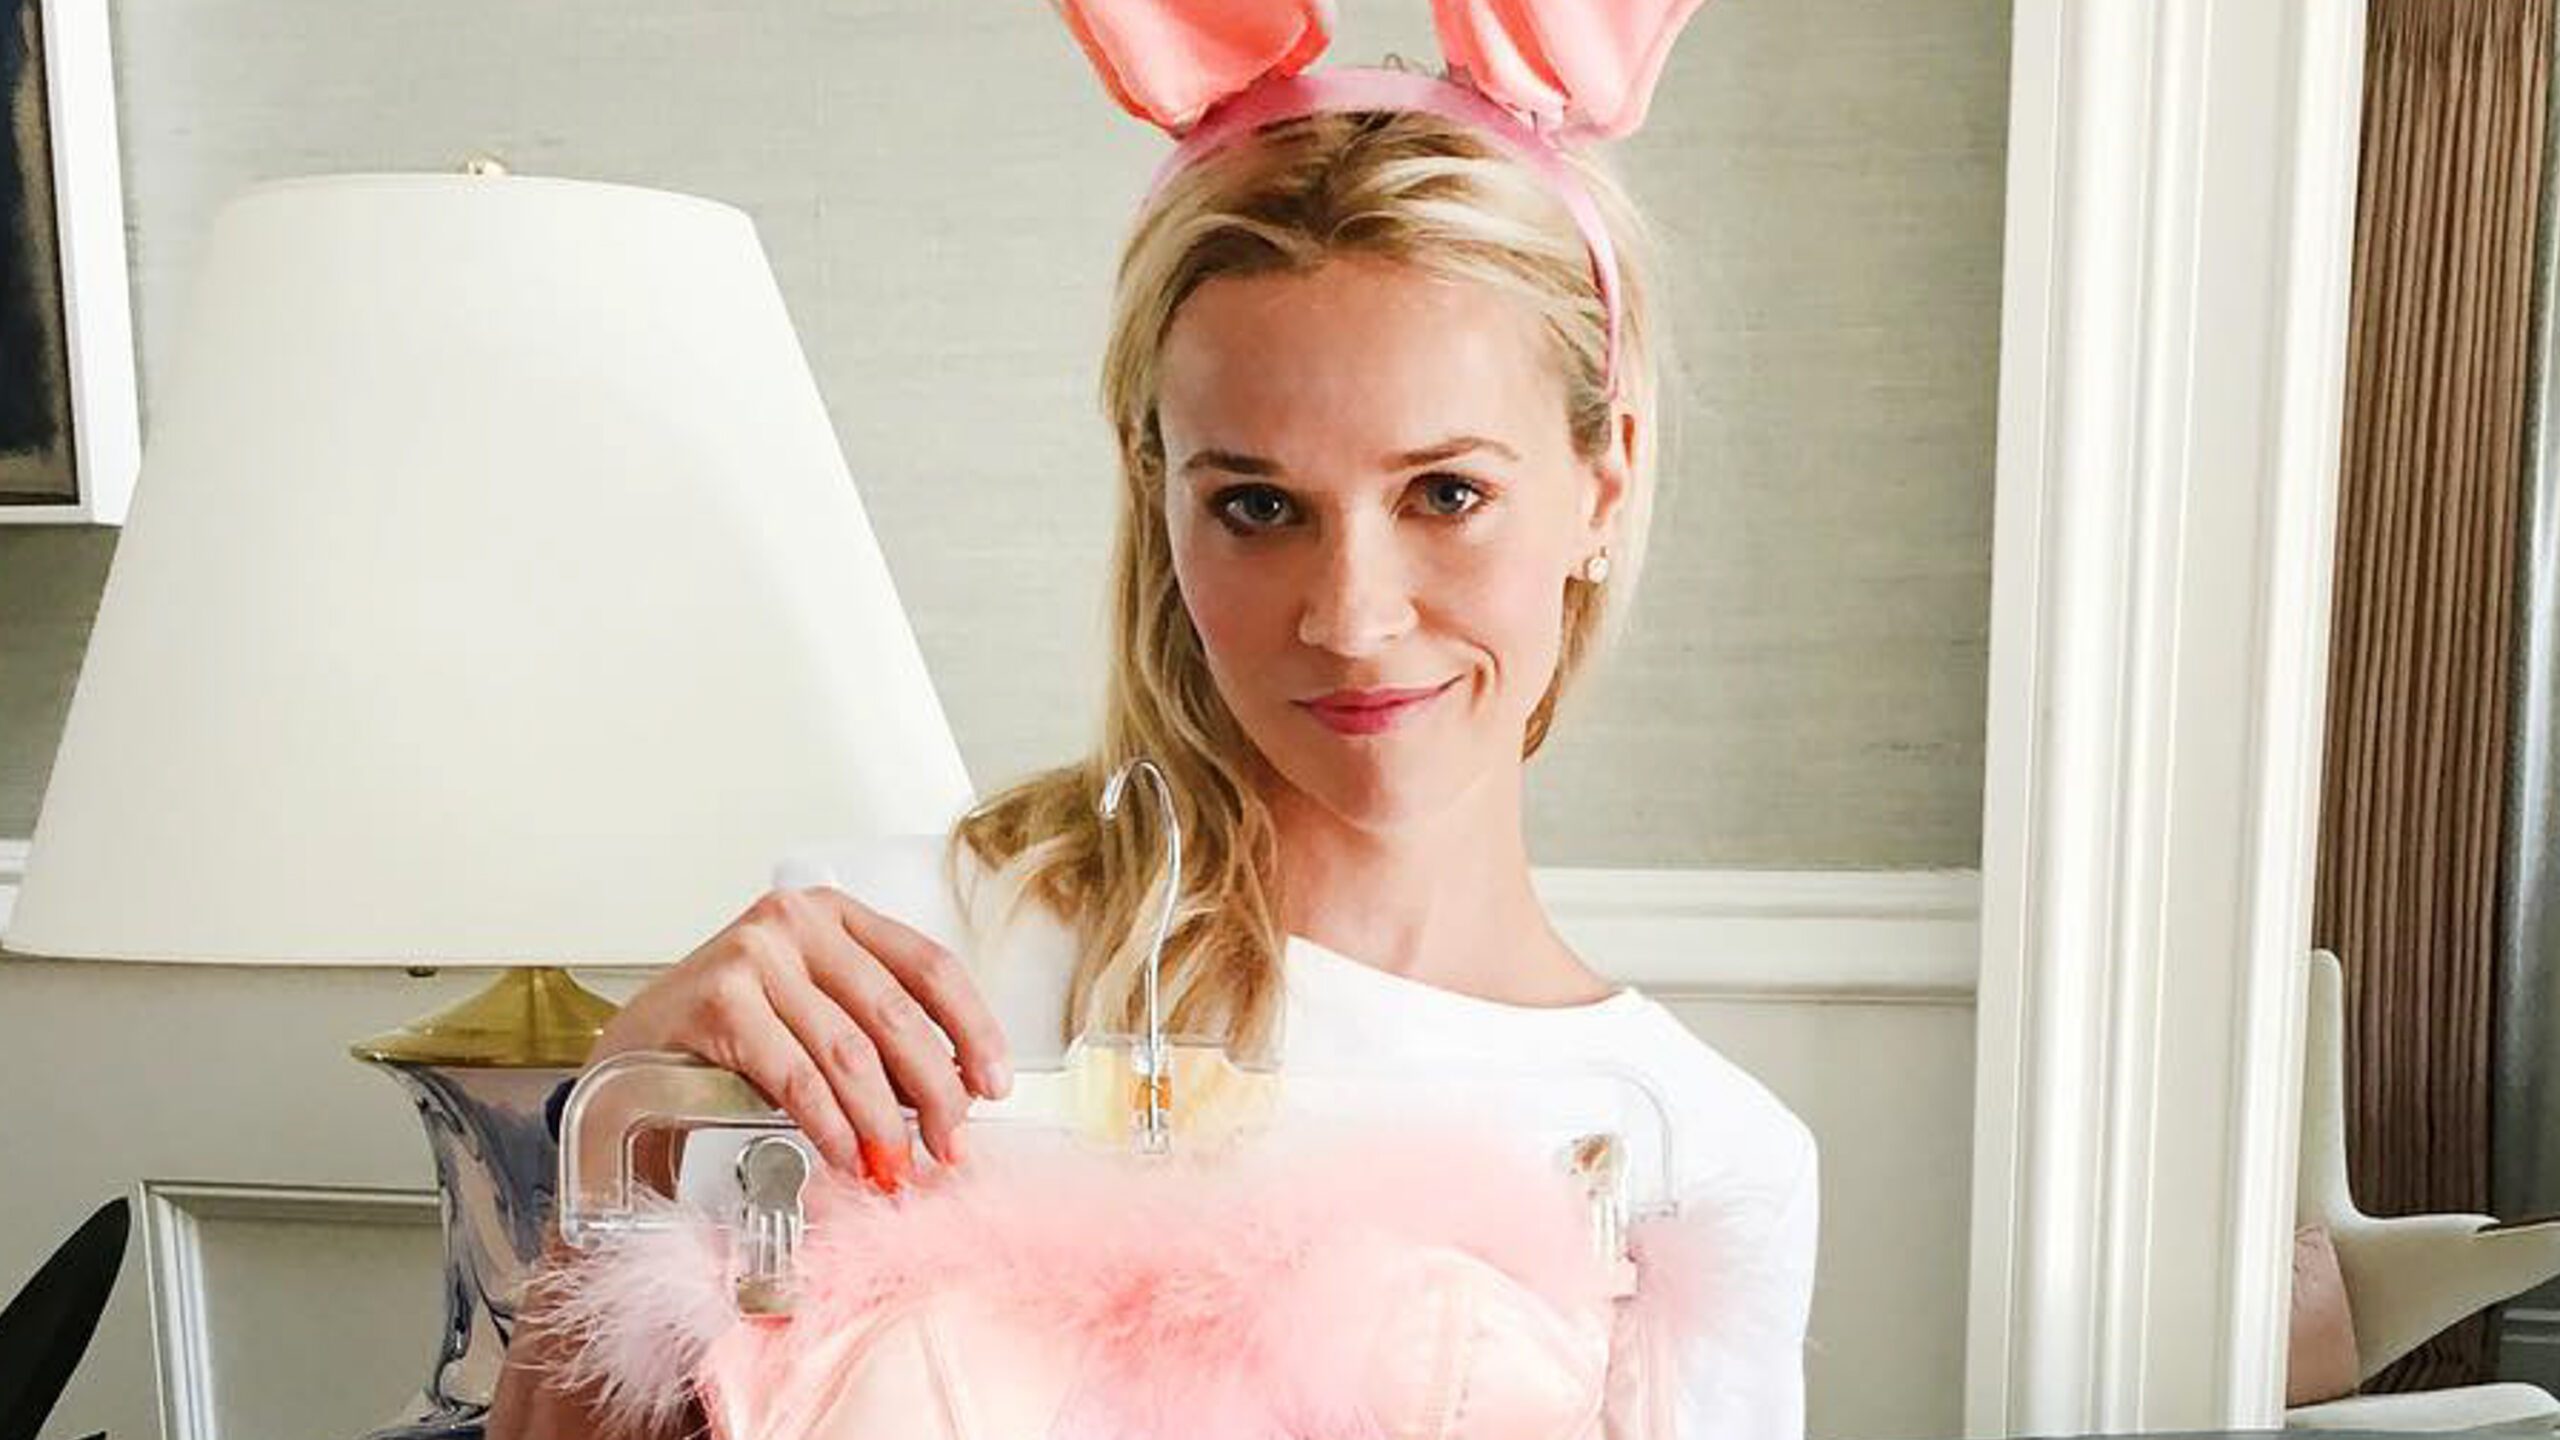 IN PHOTOS: Reese Witherspoon celebrates ‘Legally Blonde’ 15th anniversary